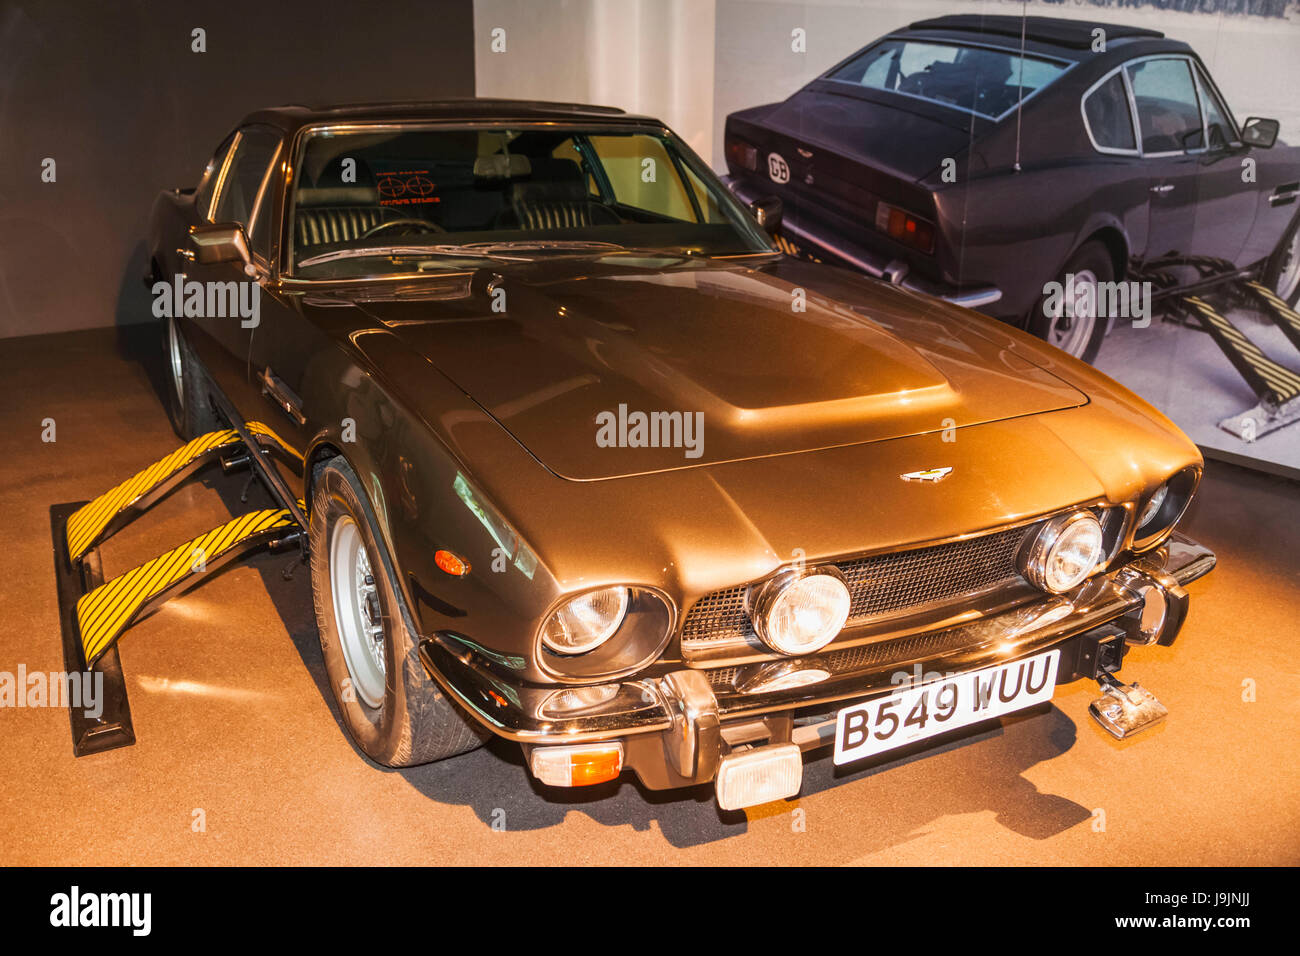 England, London, Covent Garden, London Film Museum, Aston Martin V8 Car from The James Bond Movie The Living Daylights dated 1987 Stock Photo